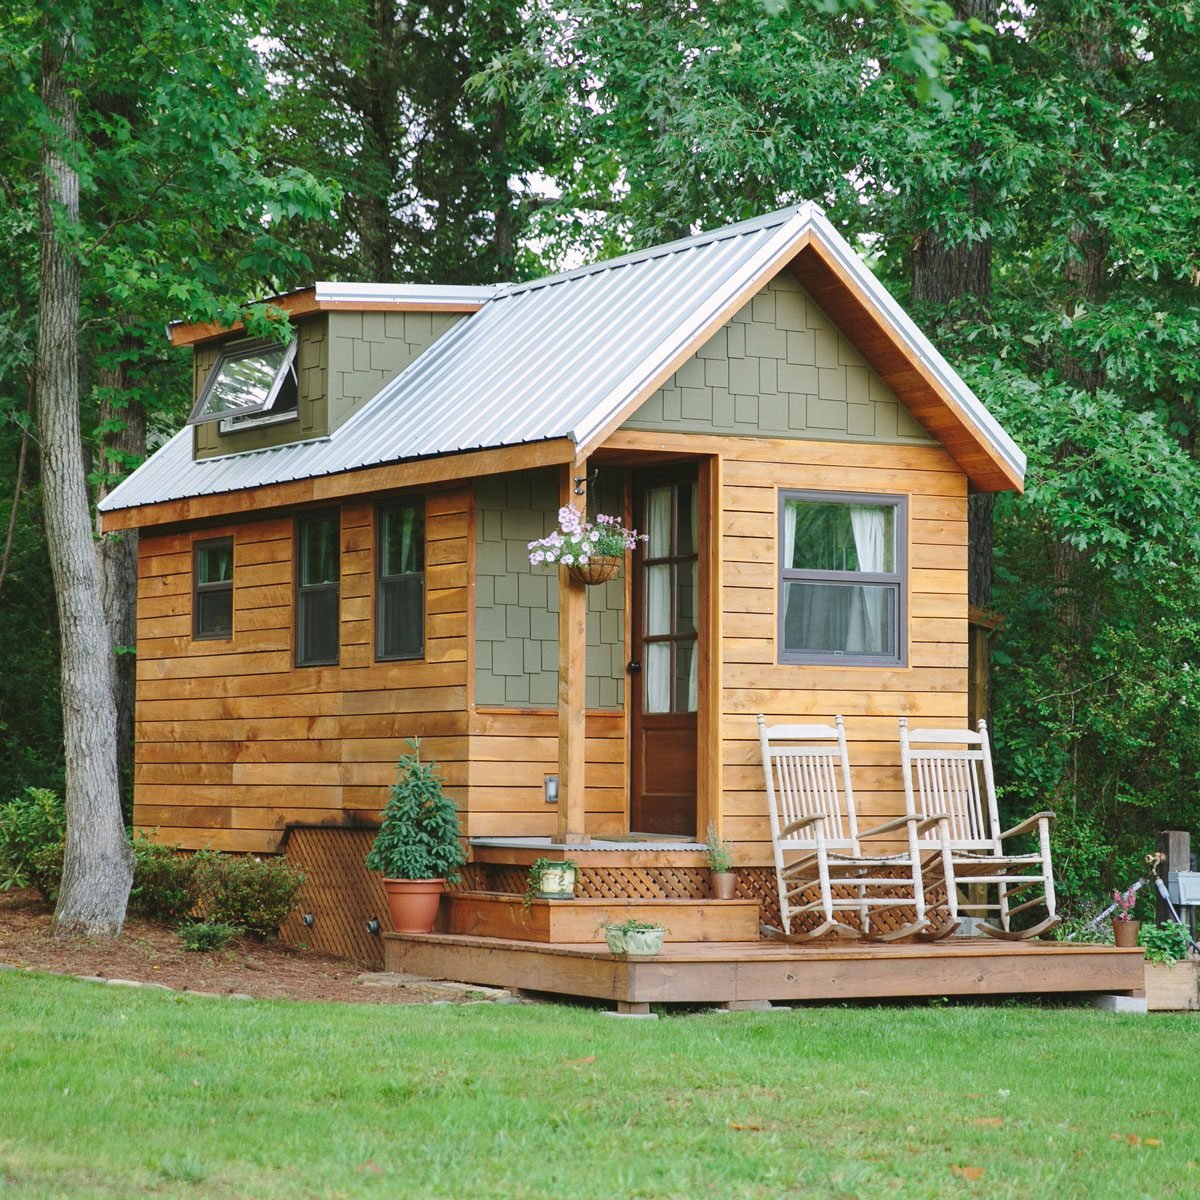 14 Amazing Tiny Homes: Pictures of Tiny Houses Inside and Out: Family